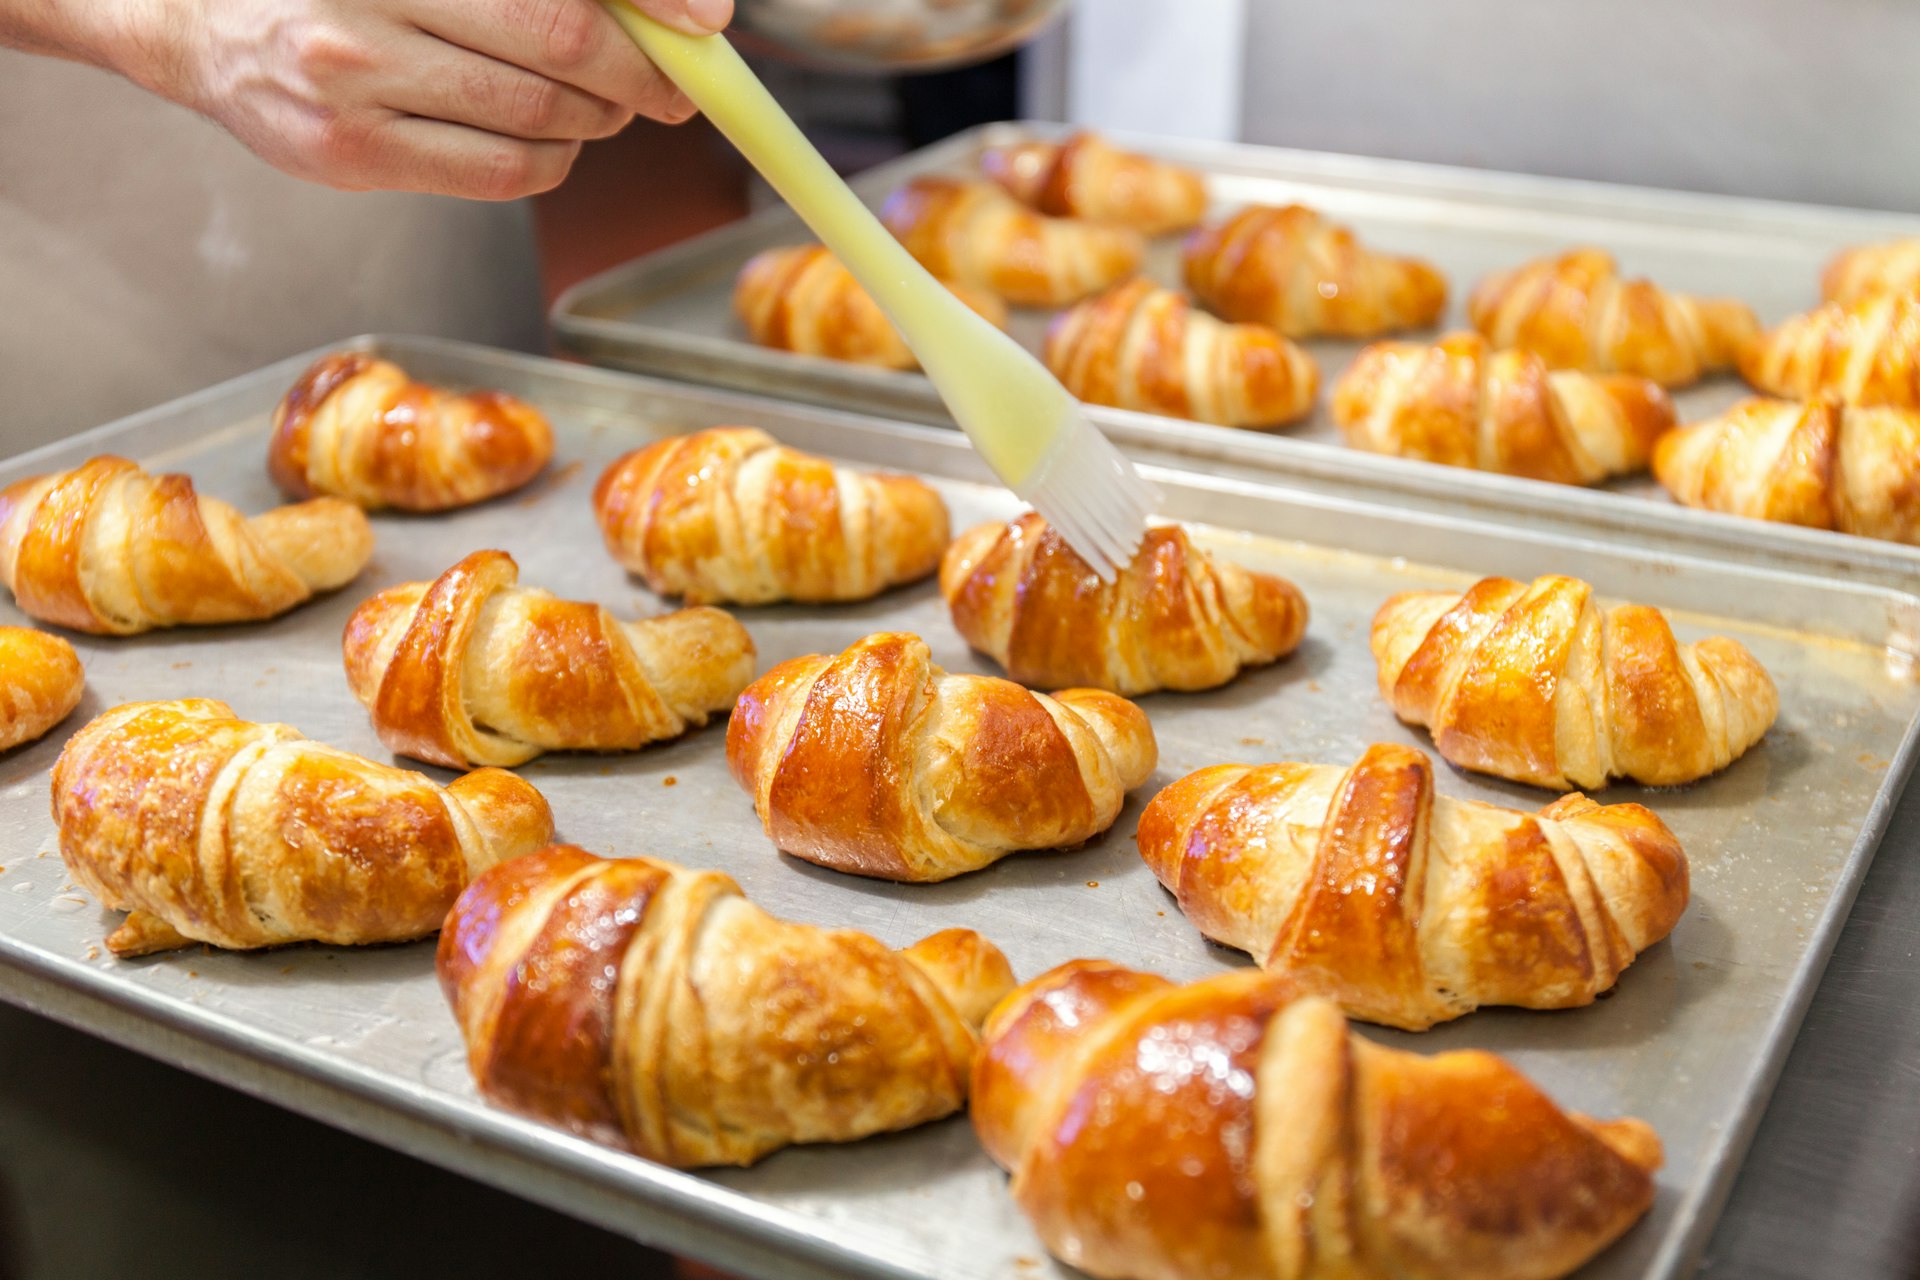 A pastry chef is brushing golden croissants laid out on trays in a professional bakery.